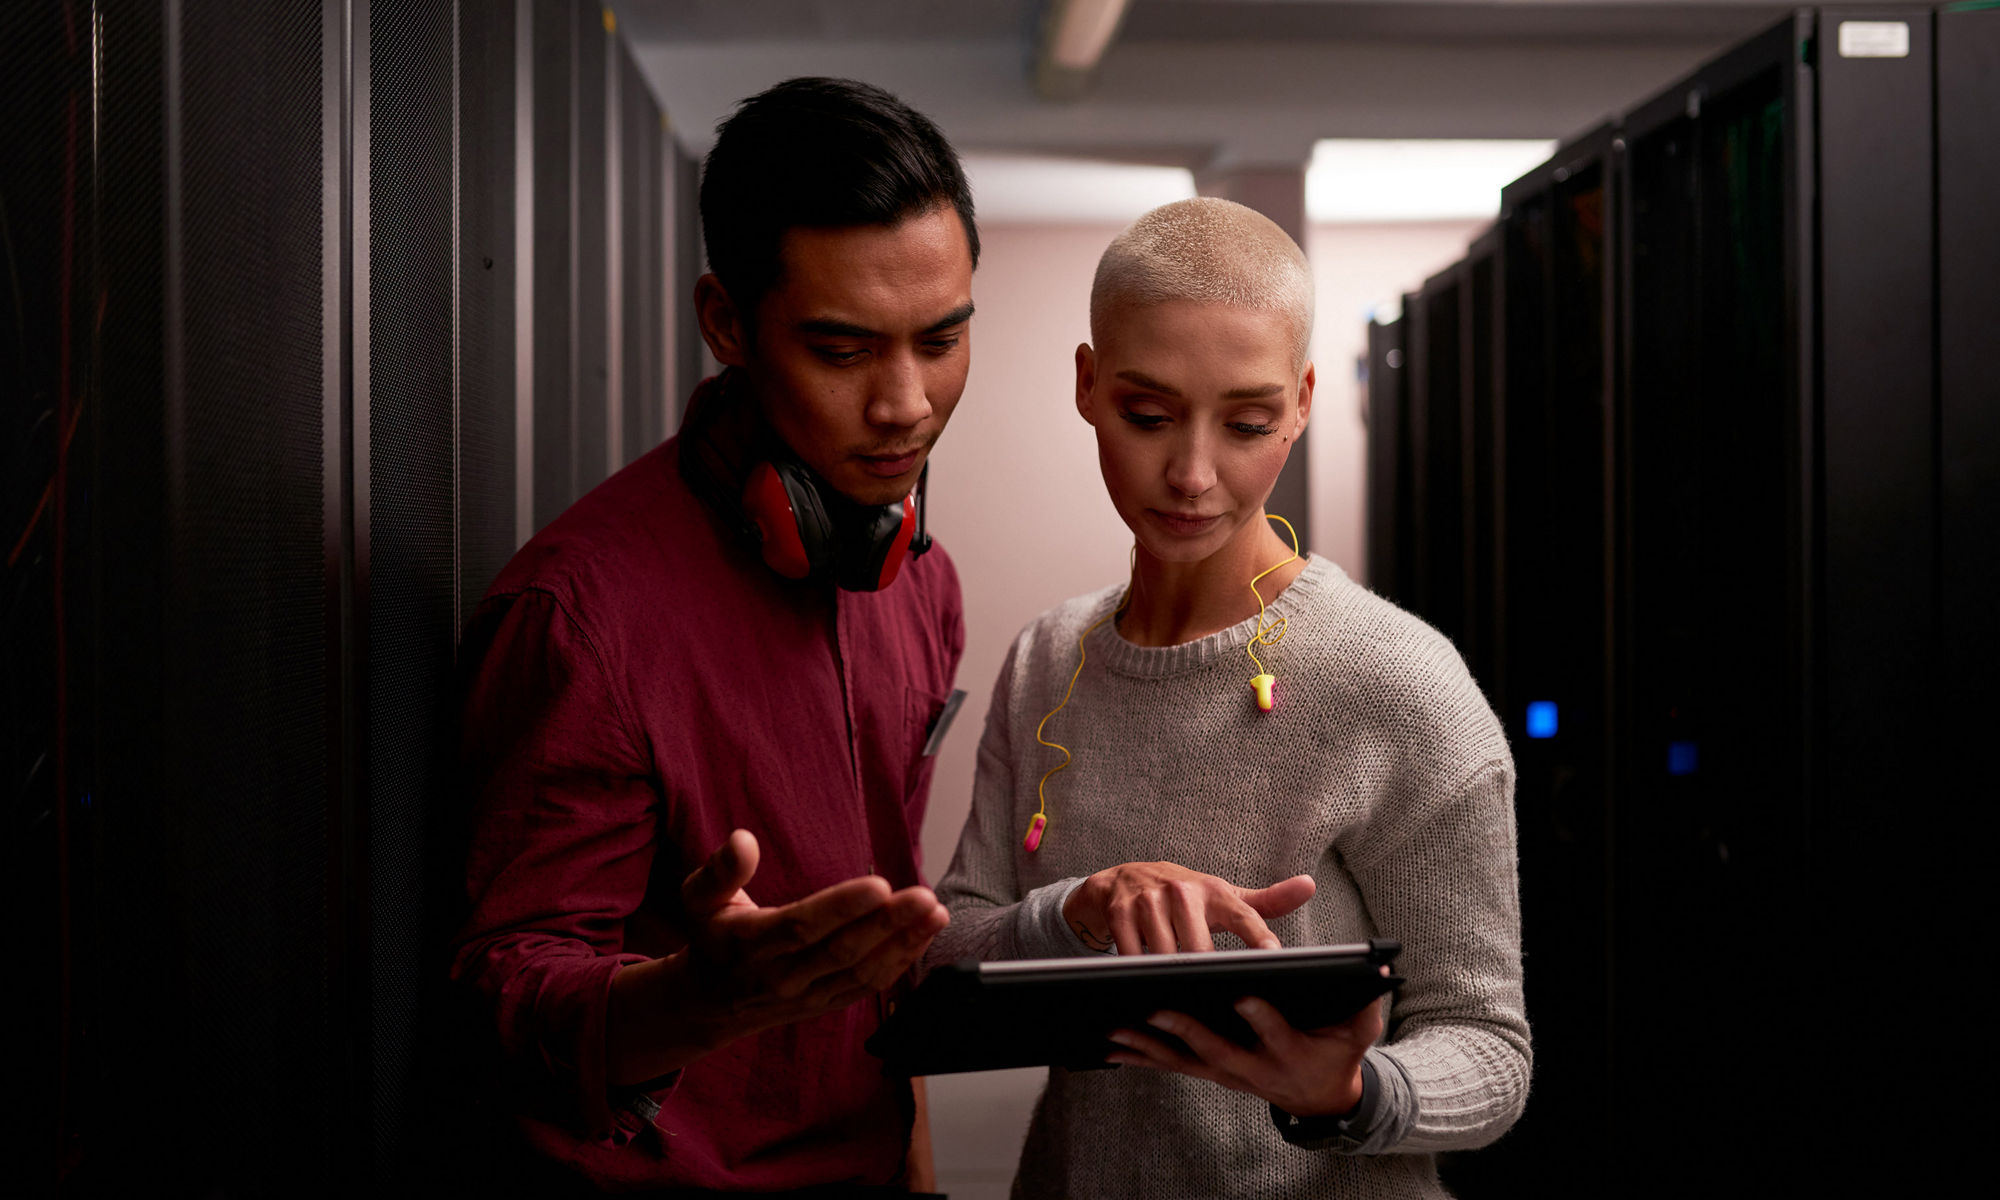 Man and woman looking at tablet device in data center